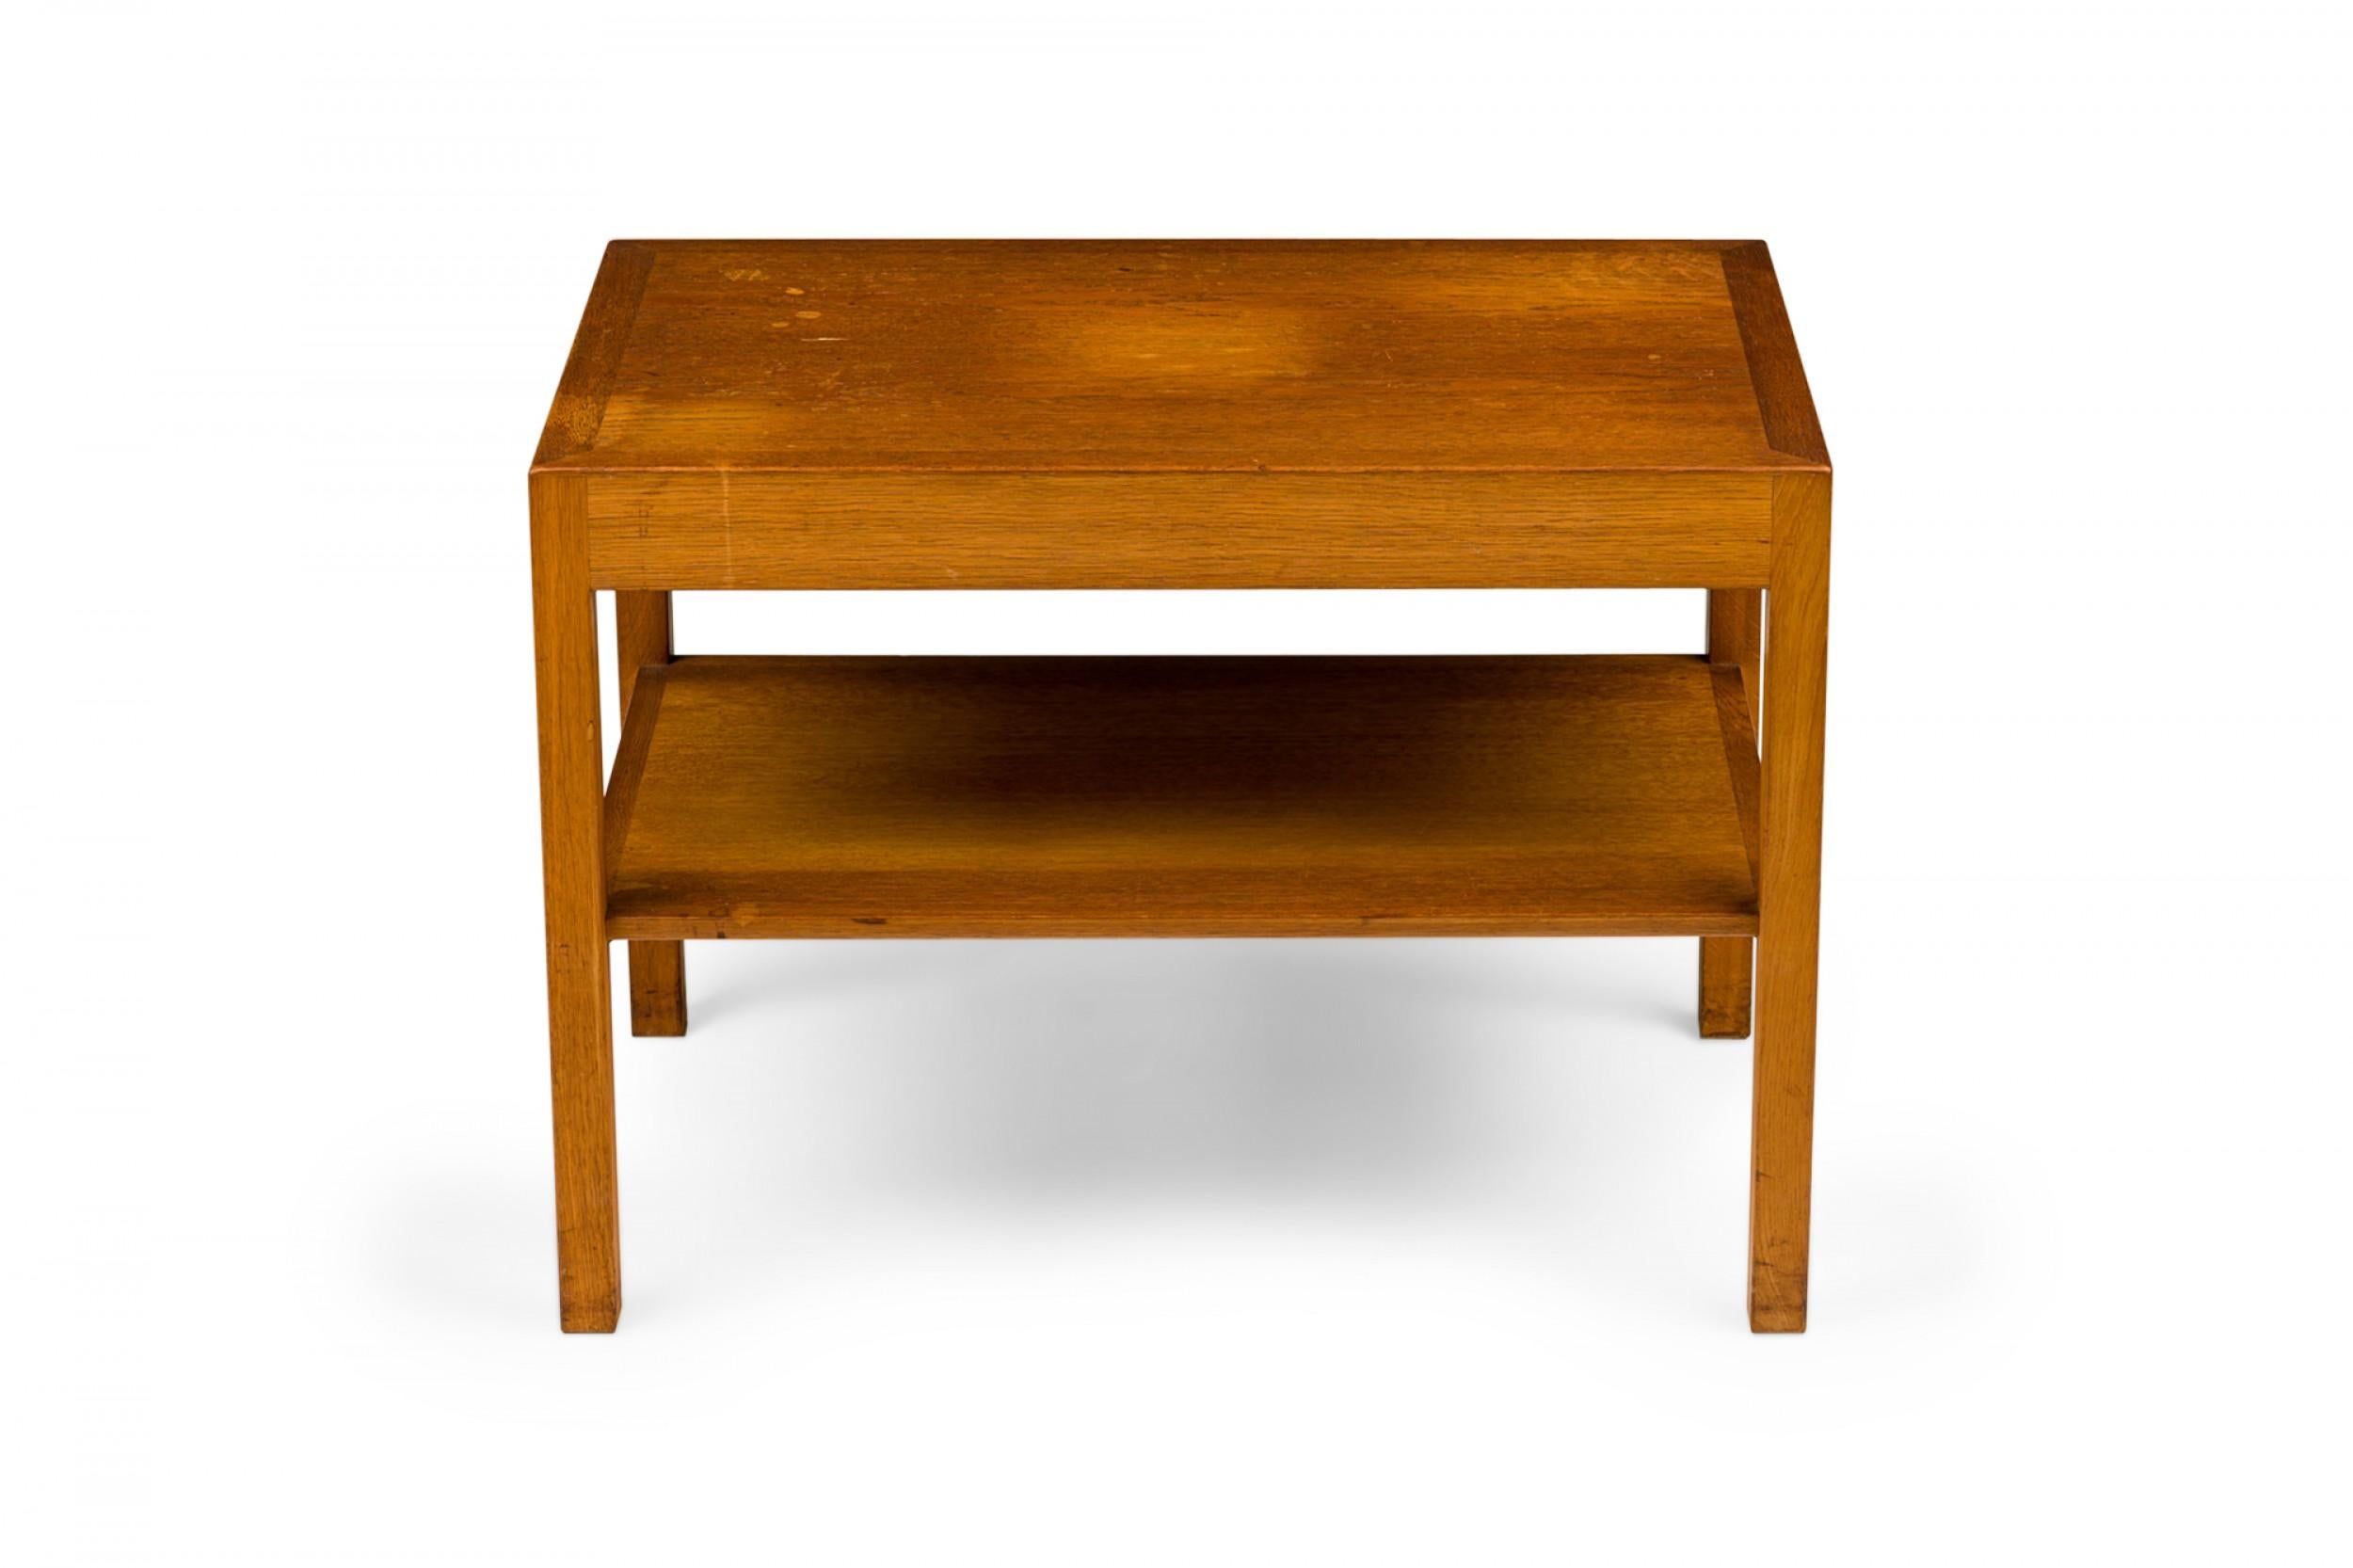 Mid-Century Modern rectangular oak wood end / side table with a lower shelf, resting on four square legs. (HANS WEGNER FOR ANDREAS TUCK)
